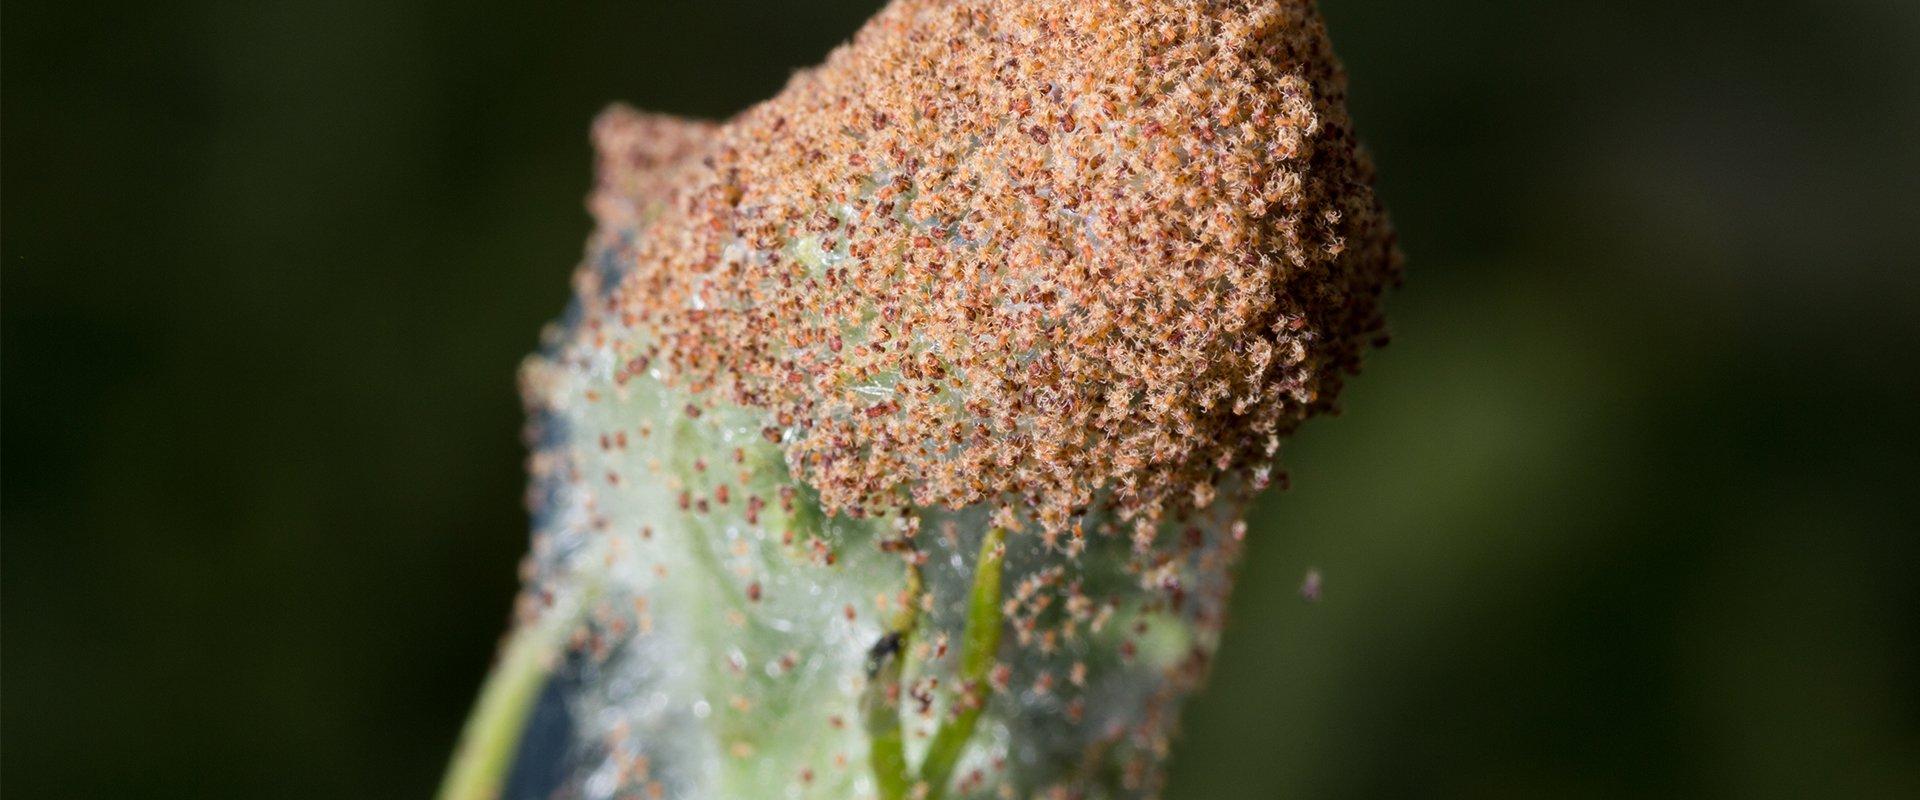 many mites all over a plant